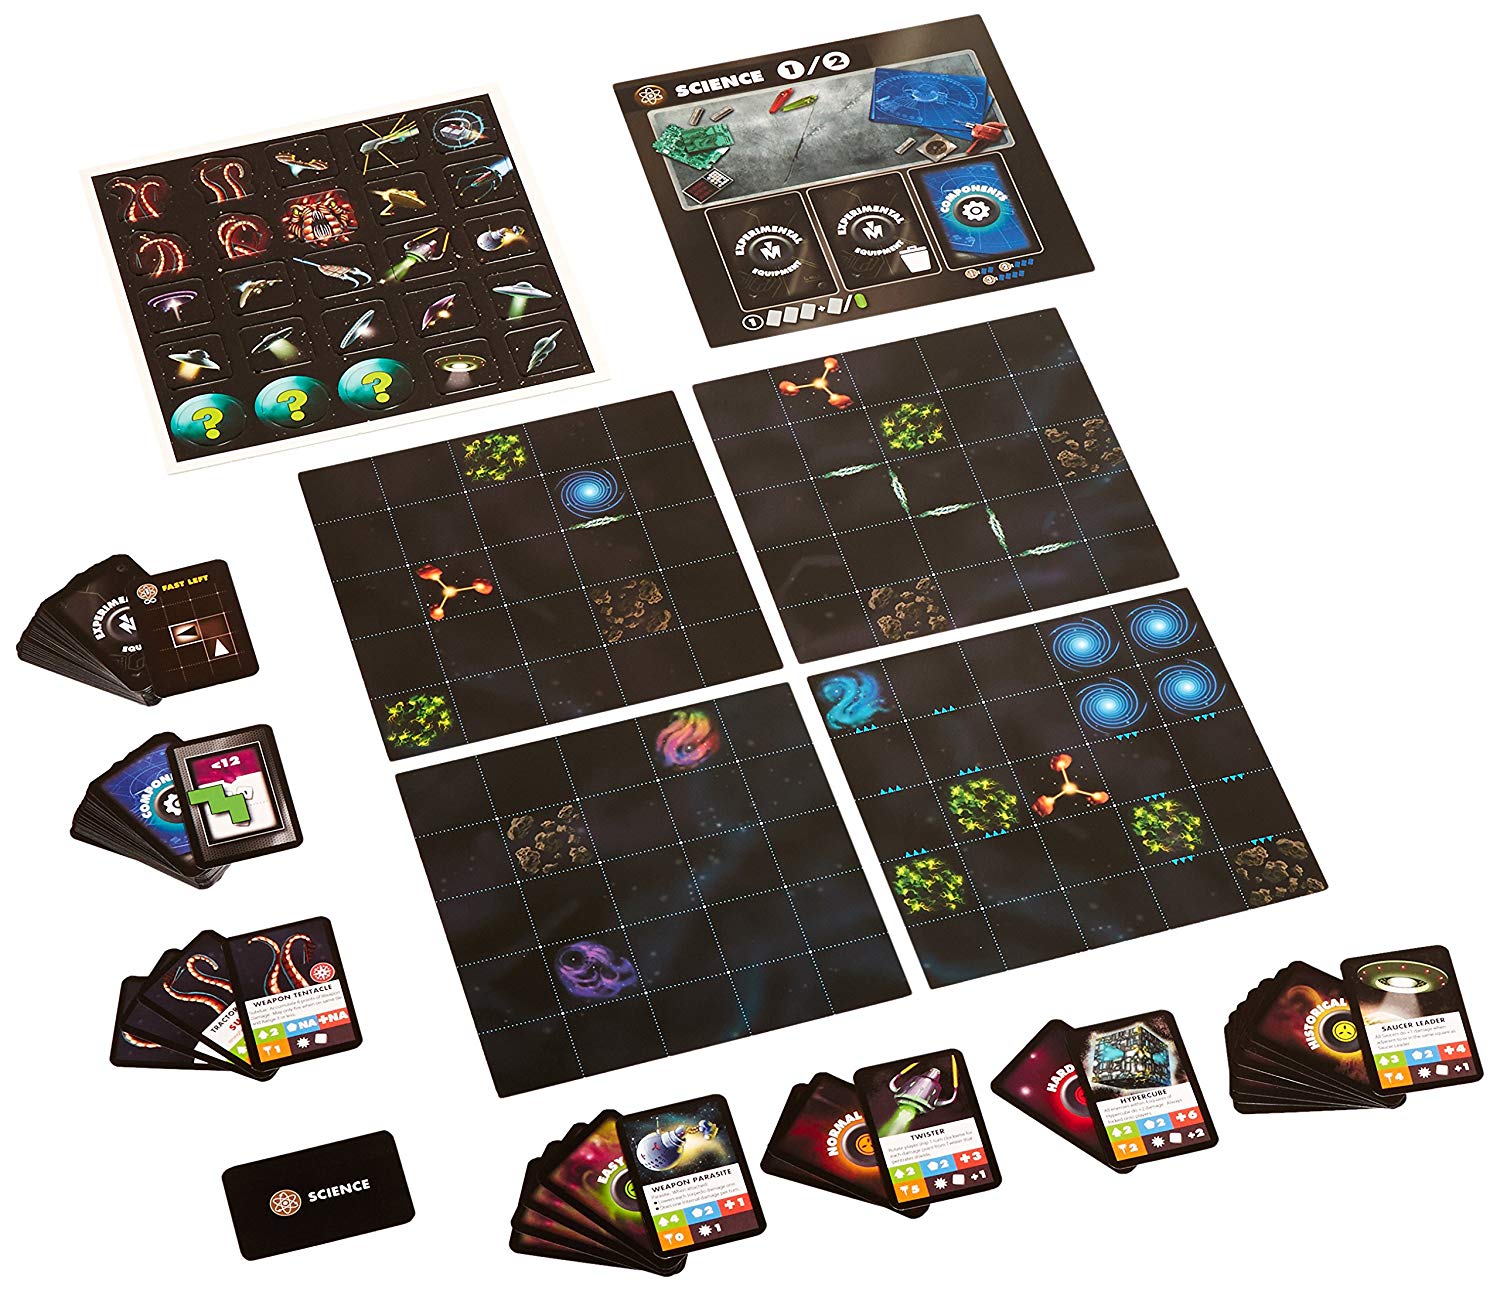 Space Cadets: Resistance Is Mostly Futile | Kessel Run Games Inc. 